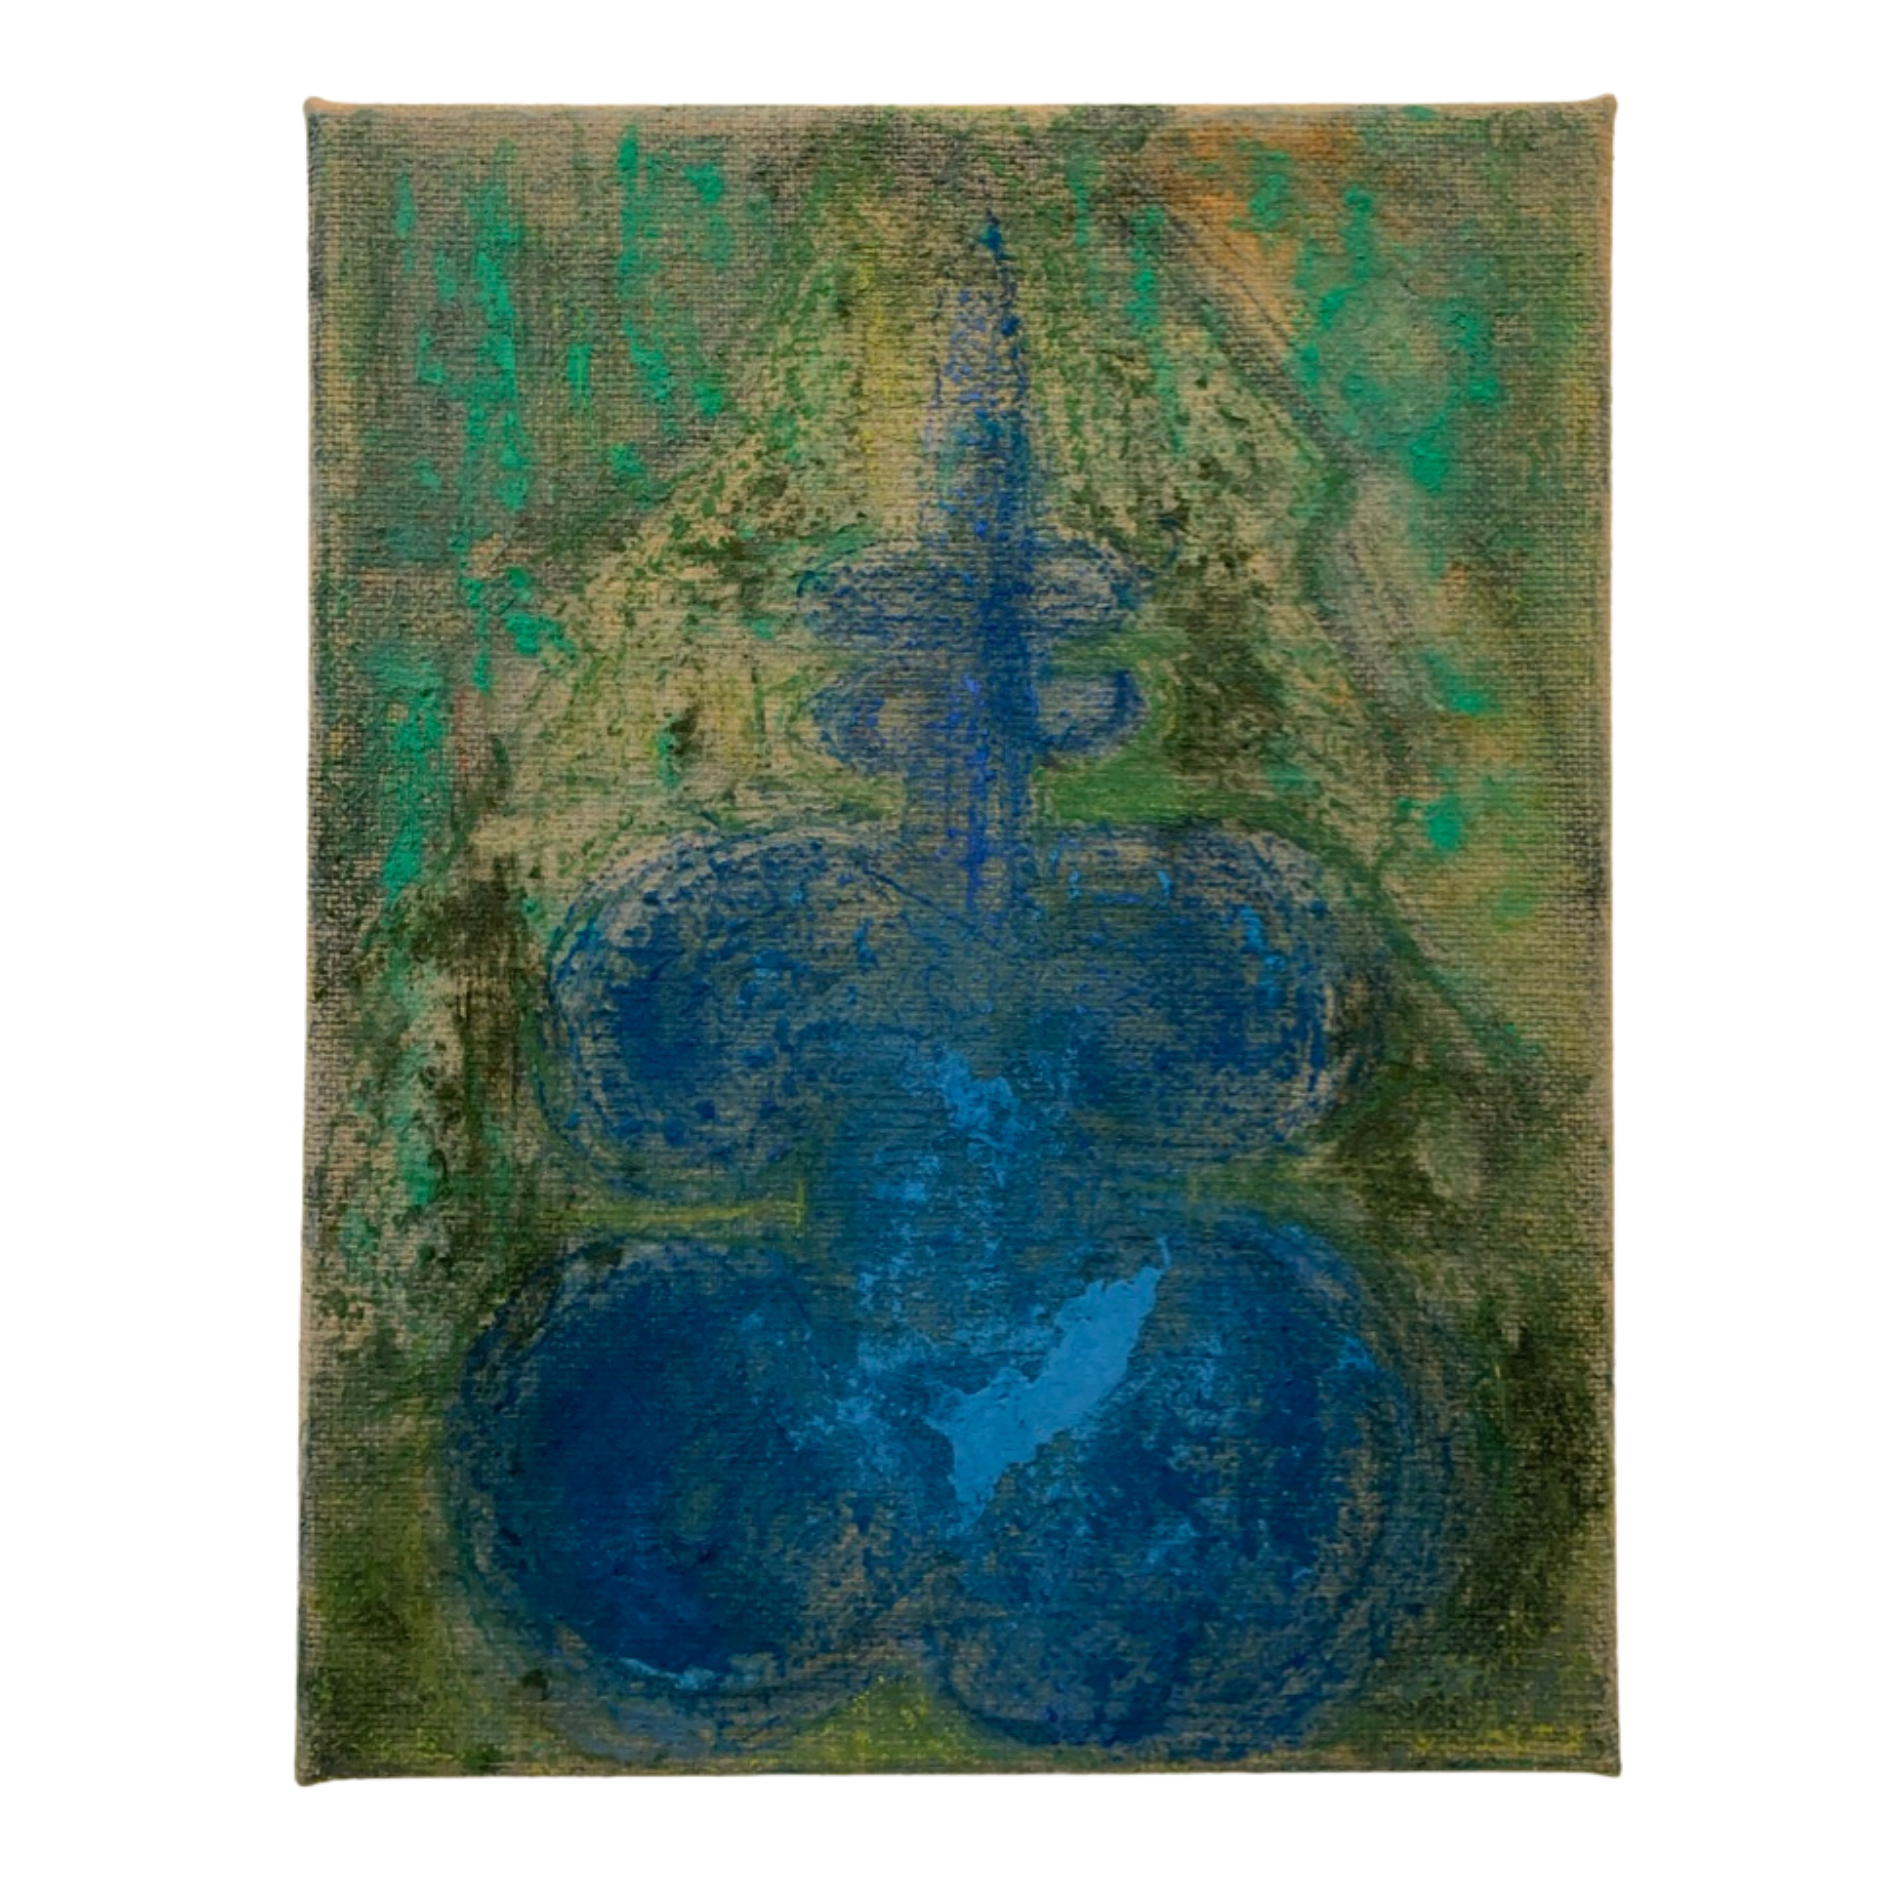 green and blue raw pigment painting on burlap